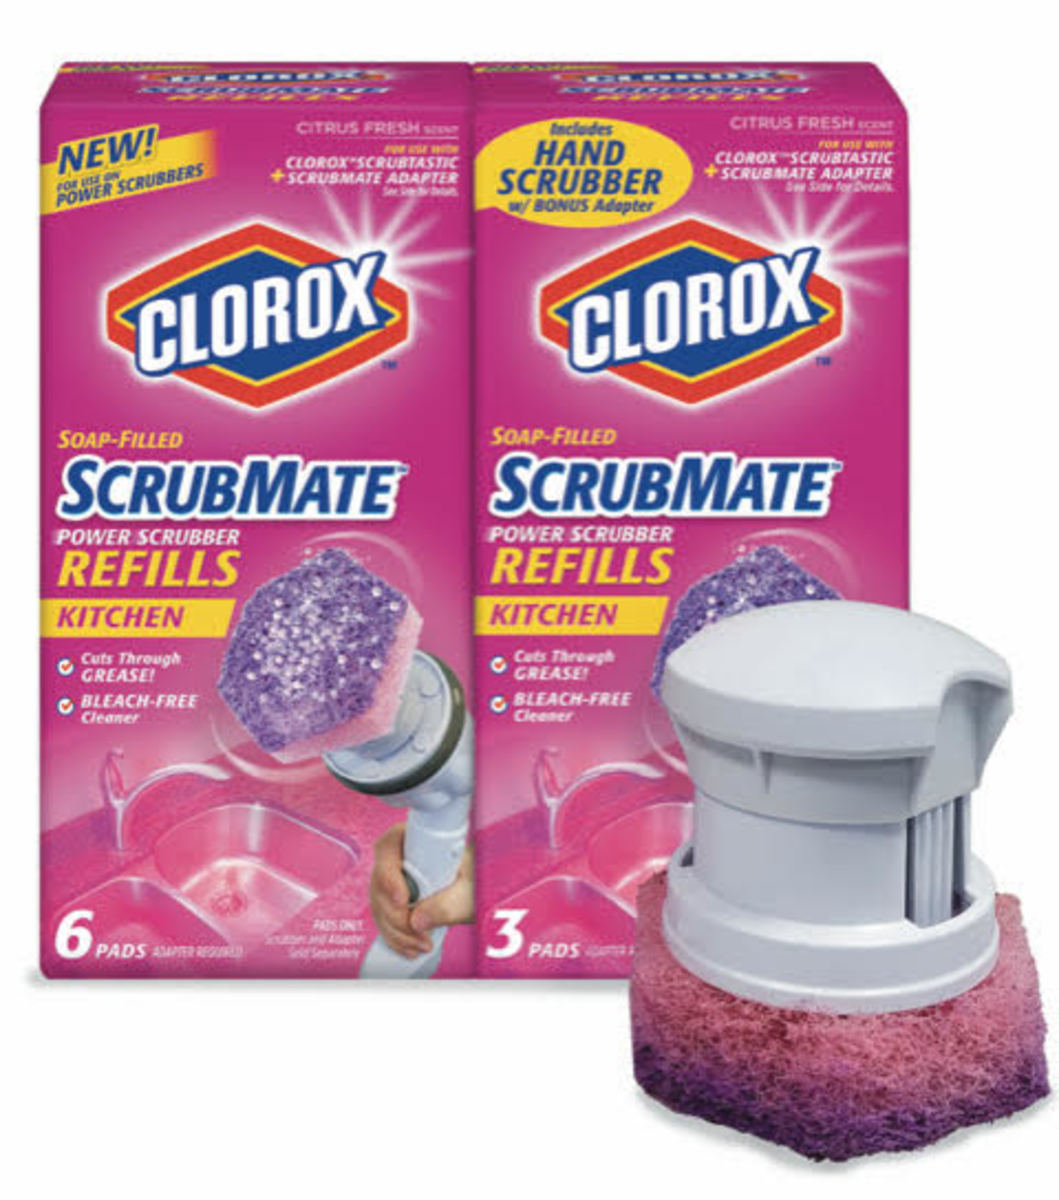 Why You Need to Up Your Cleaning Game with Clorox